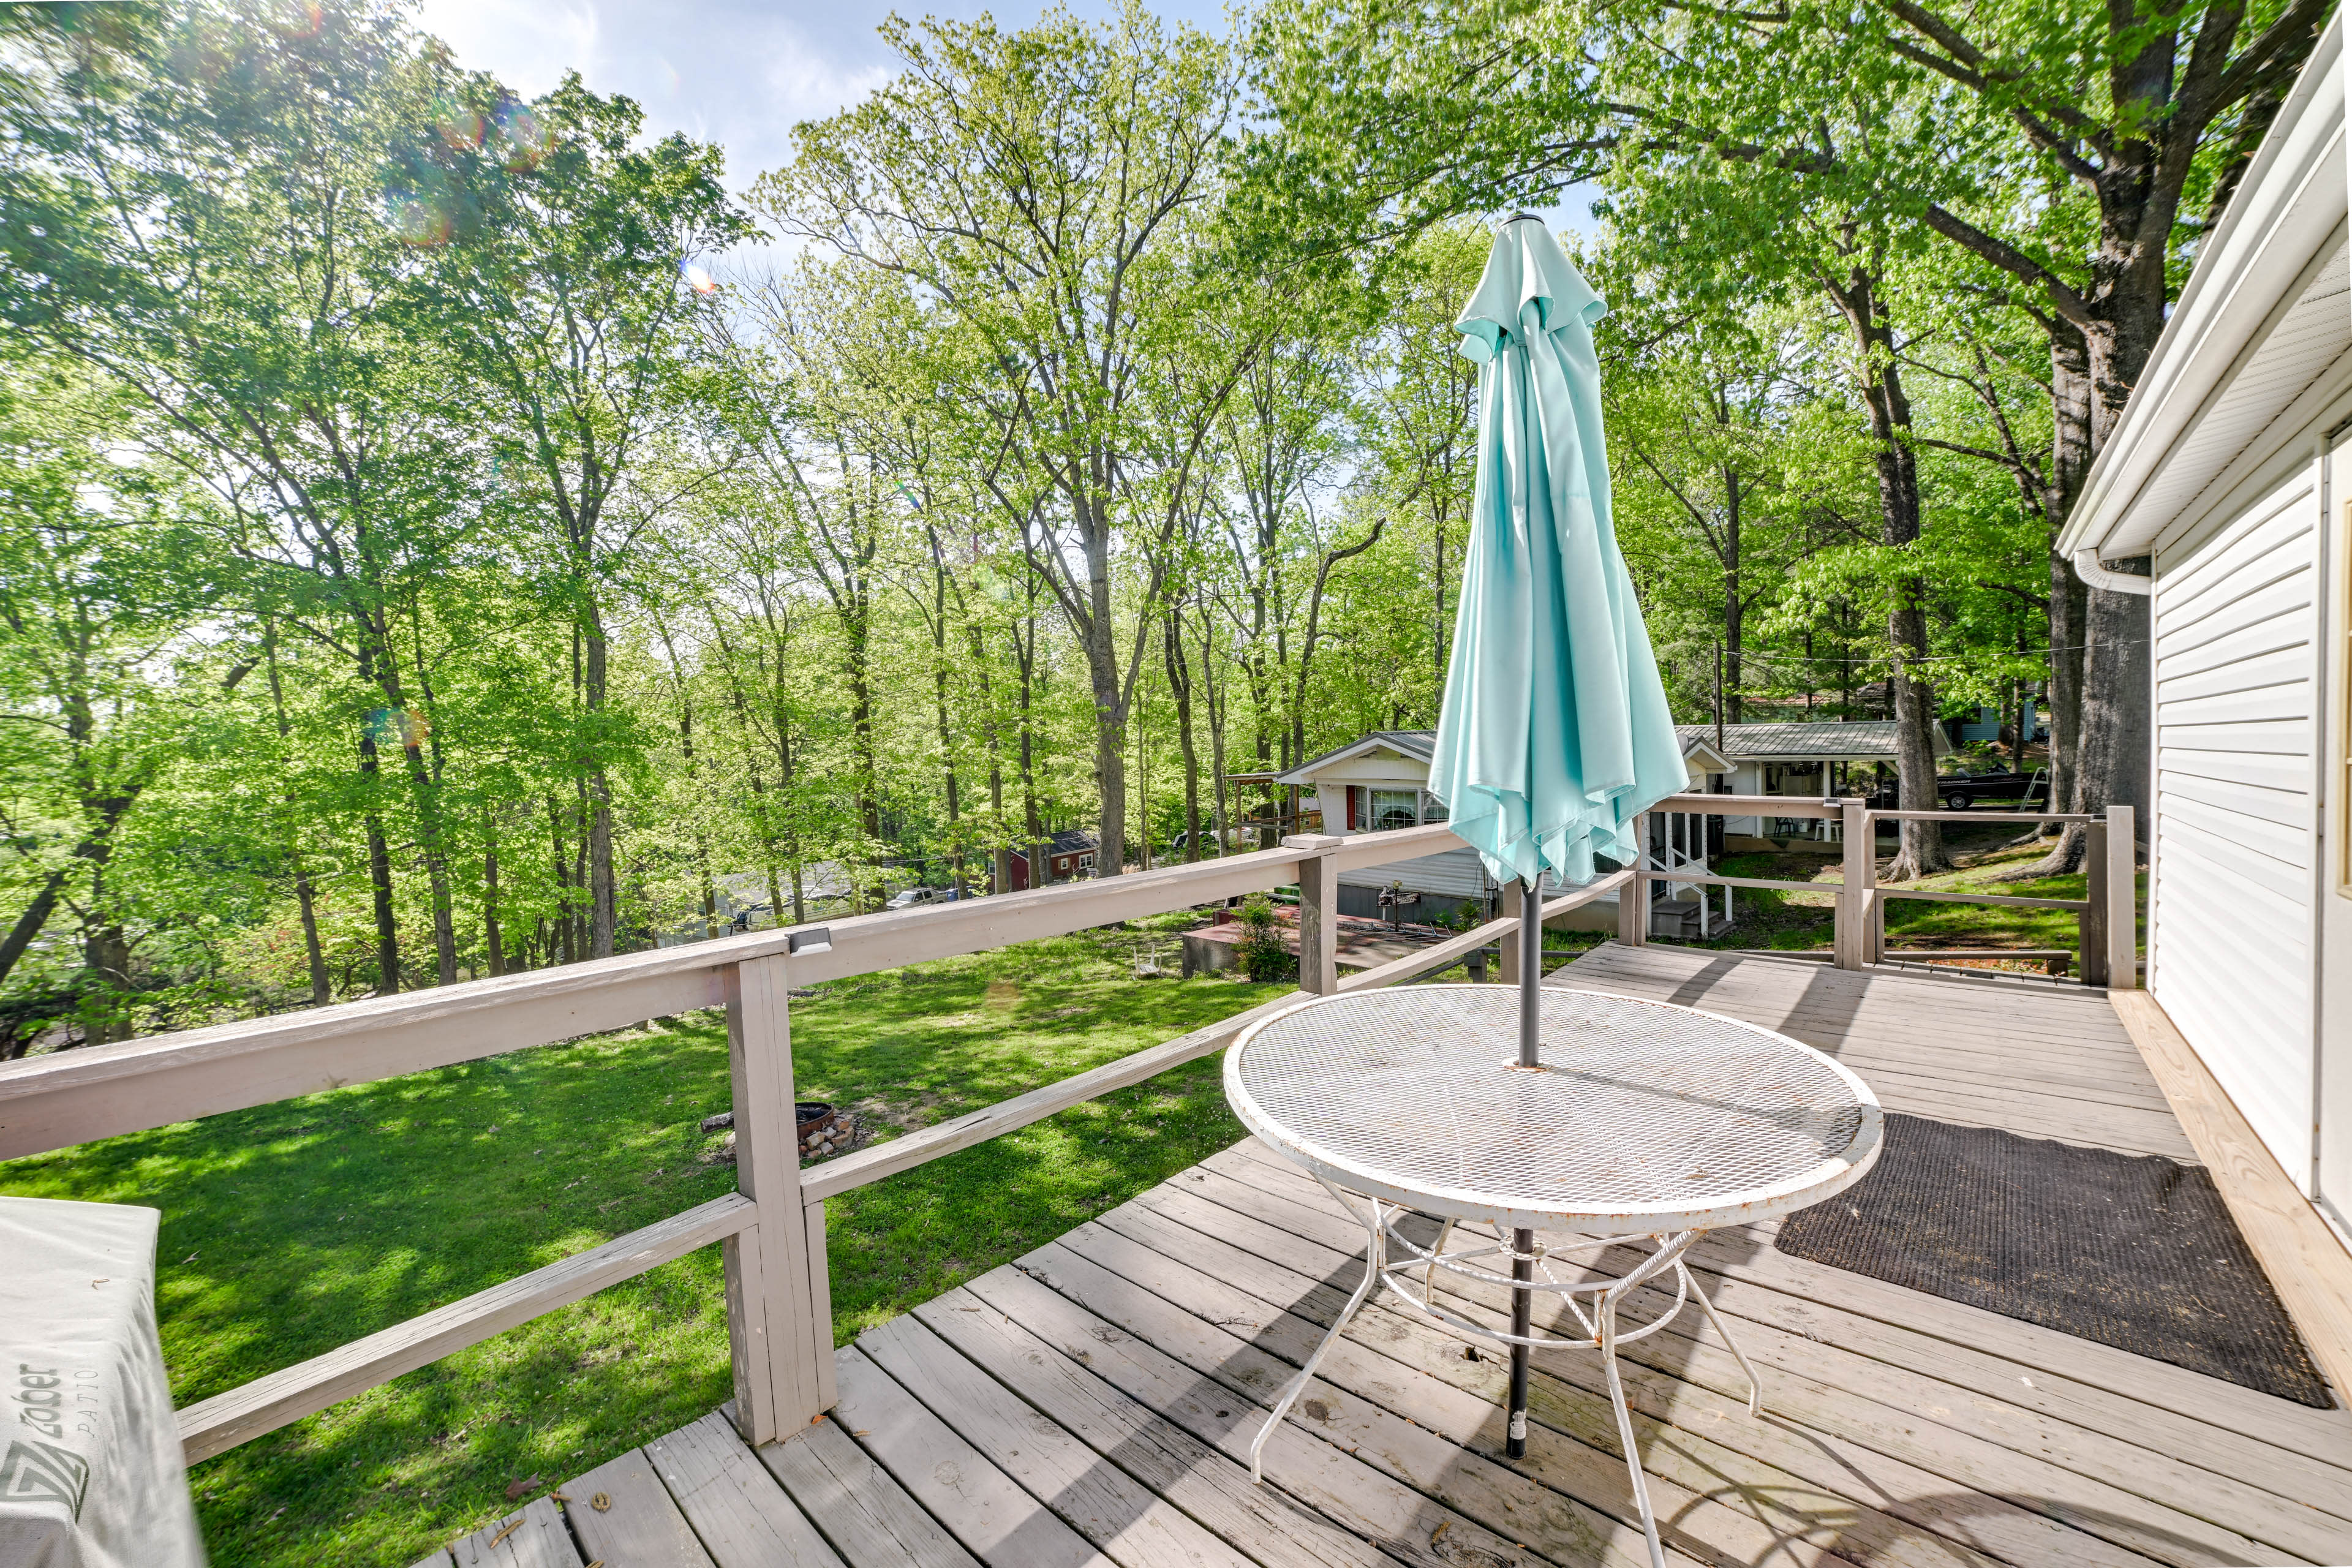 Furnished Deck | Outdoor Dining | Walk to Lake Barkley (Across the Street)